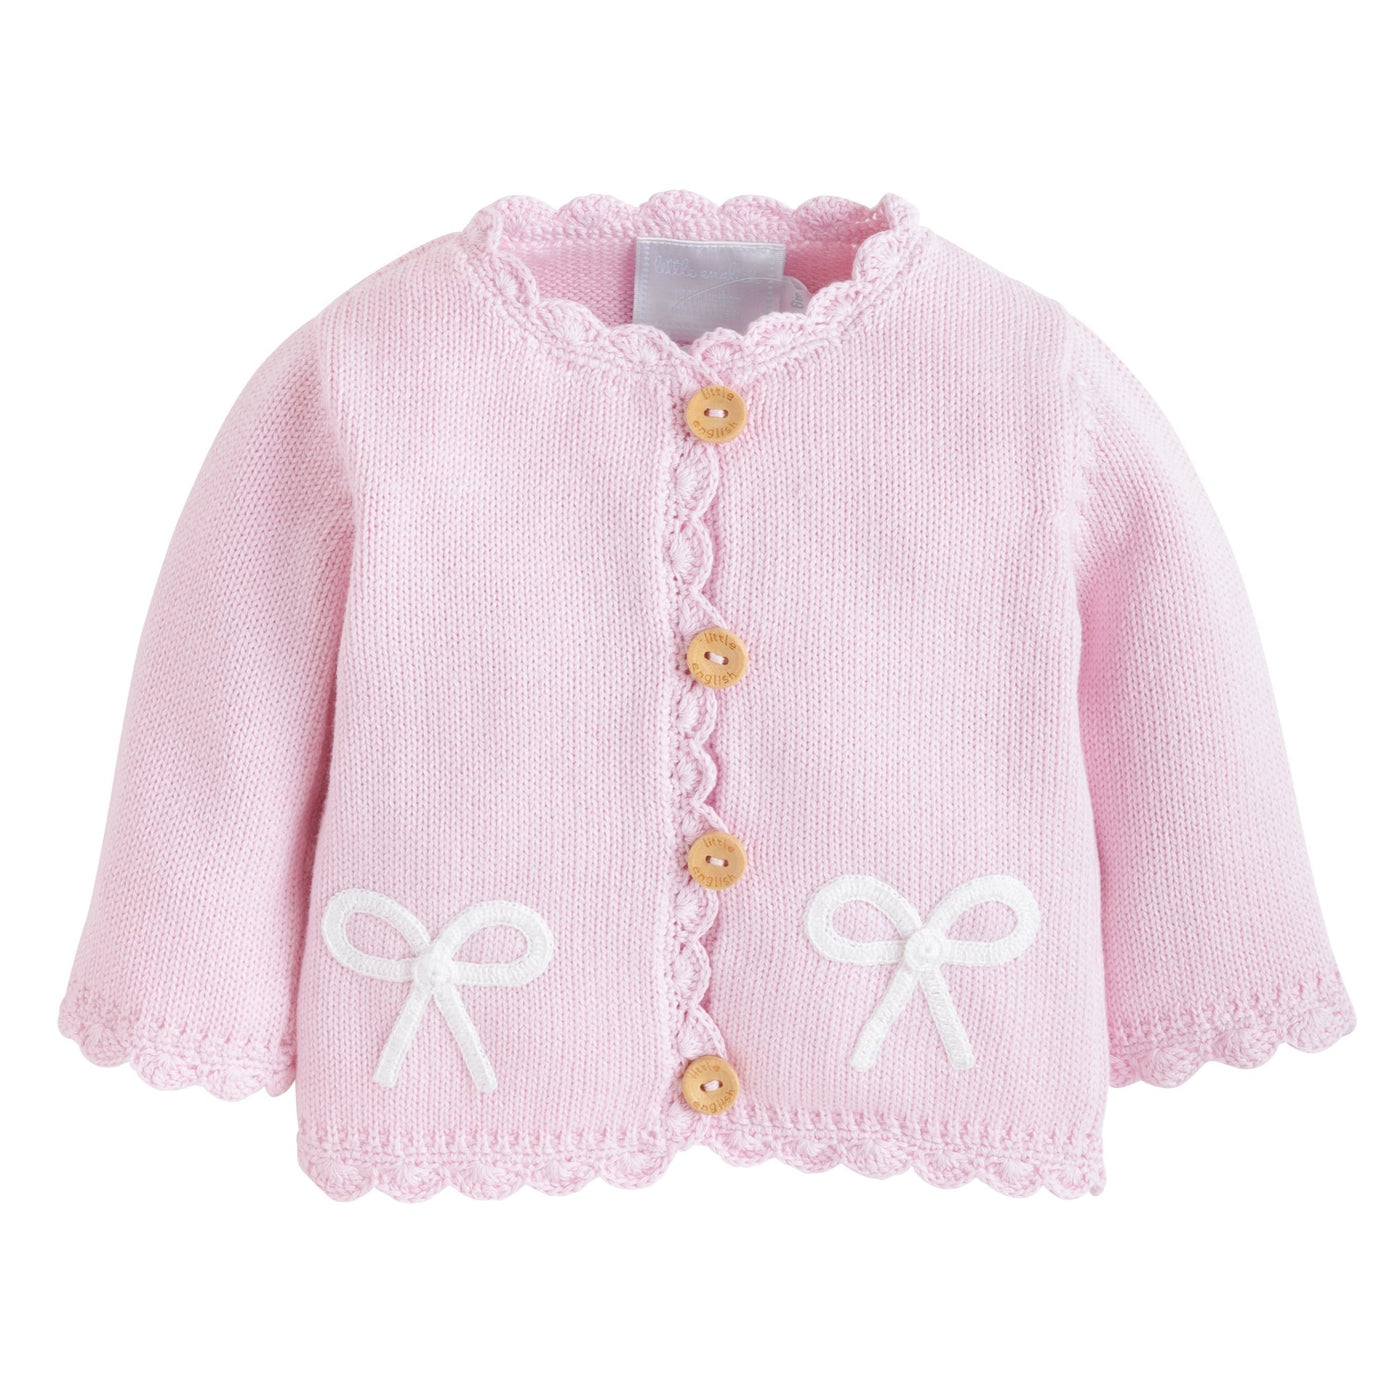 seguridadindustrialcr traditional baby clothing, signature crochet sweater with pink bow for baby girl